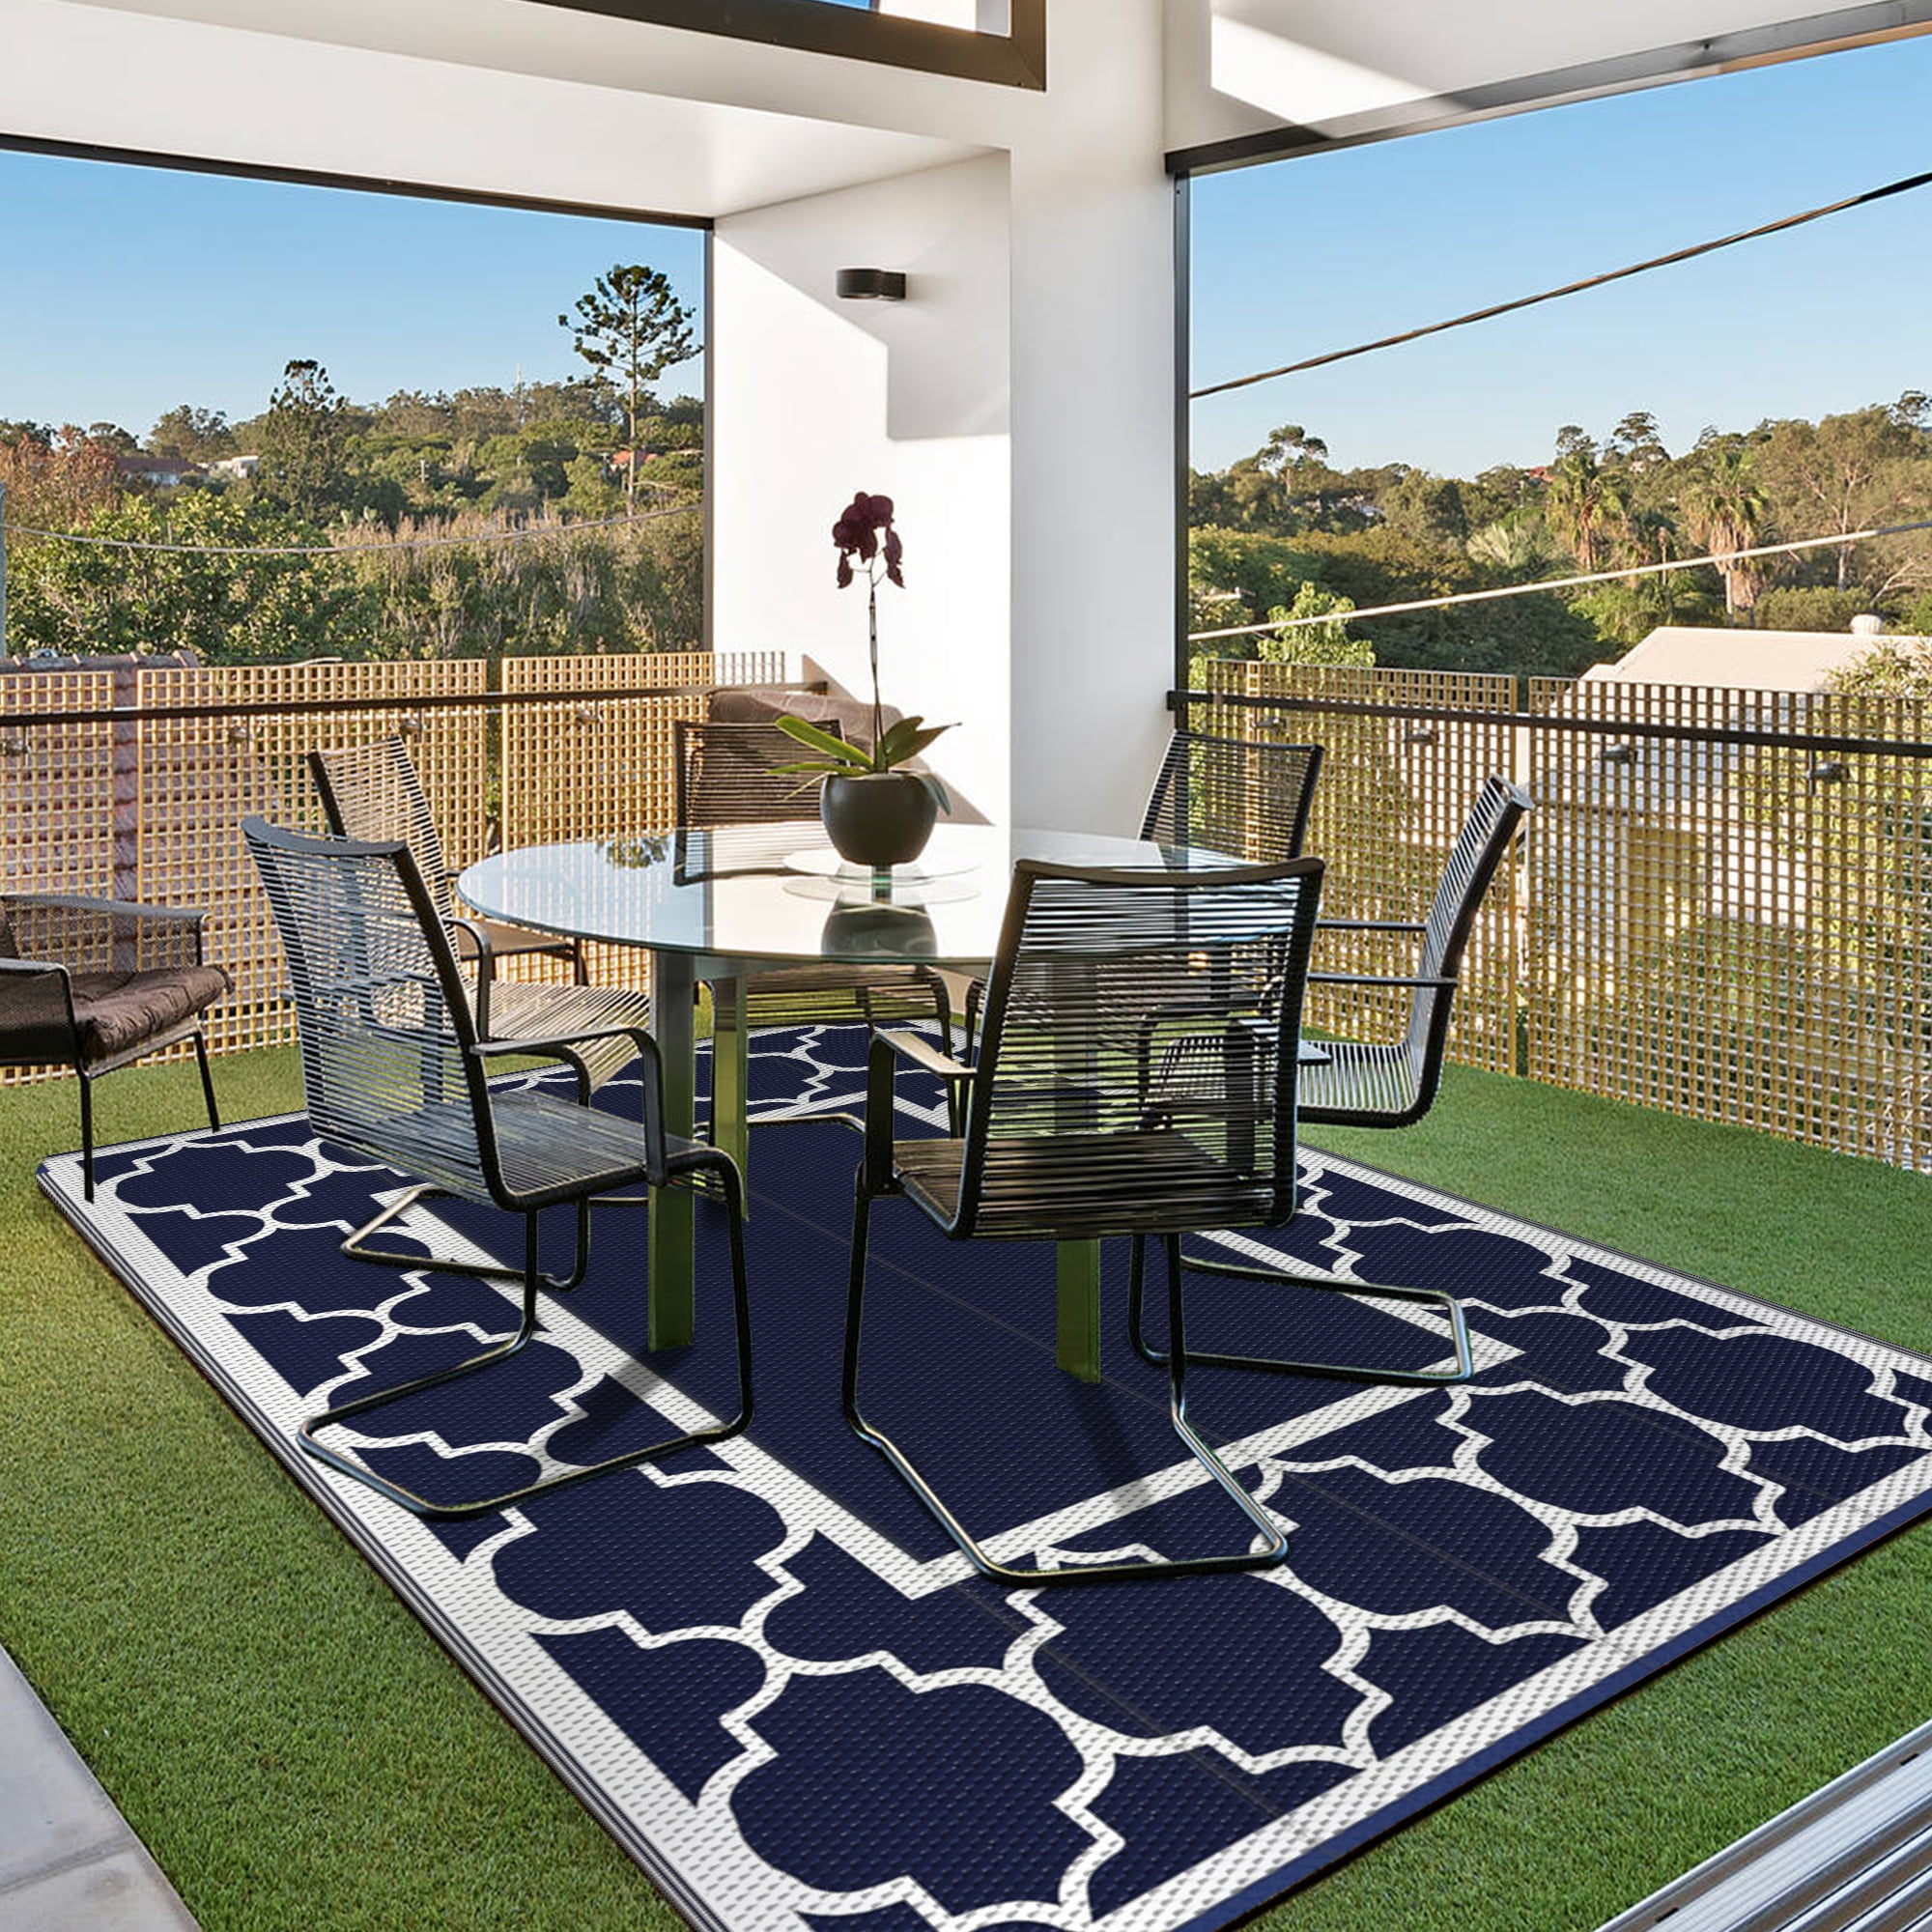 How to Choose an Outdoor Rug for Your Porch, Patio, or Balcony